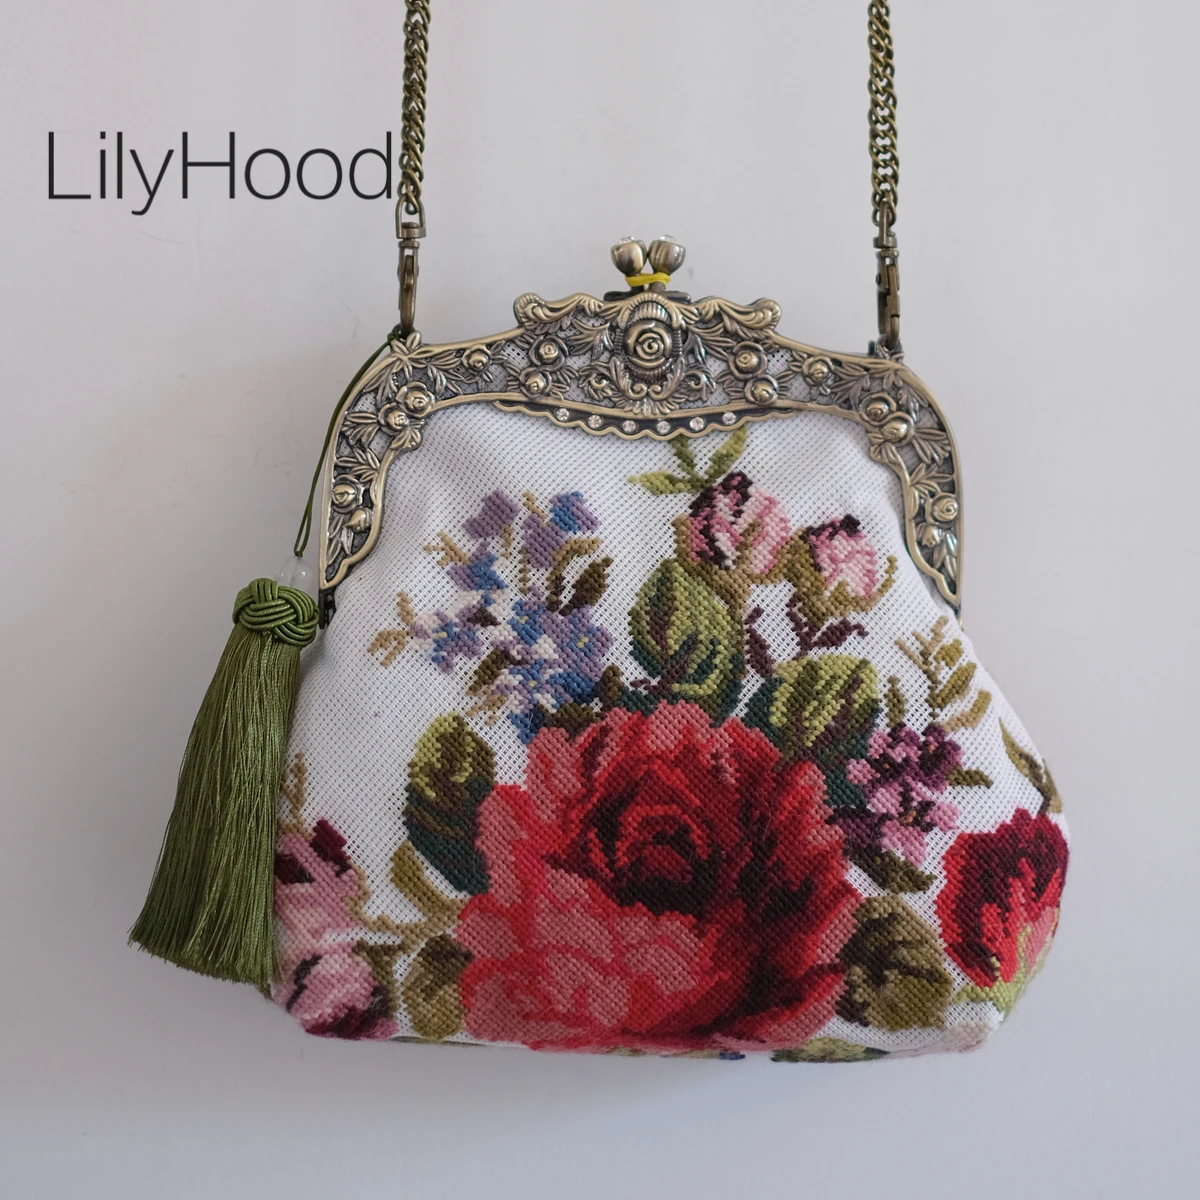 Female Handmade Vintage Luxury Aesthetics Floral Embroidery Small Clutch Bag Women Rococo Victorian Baroque Side Shoulder Bag